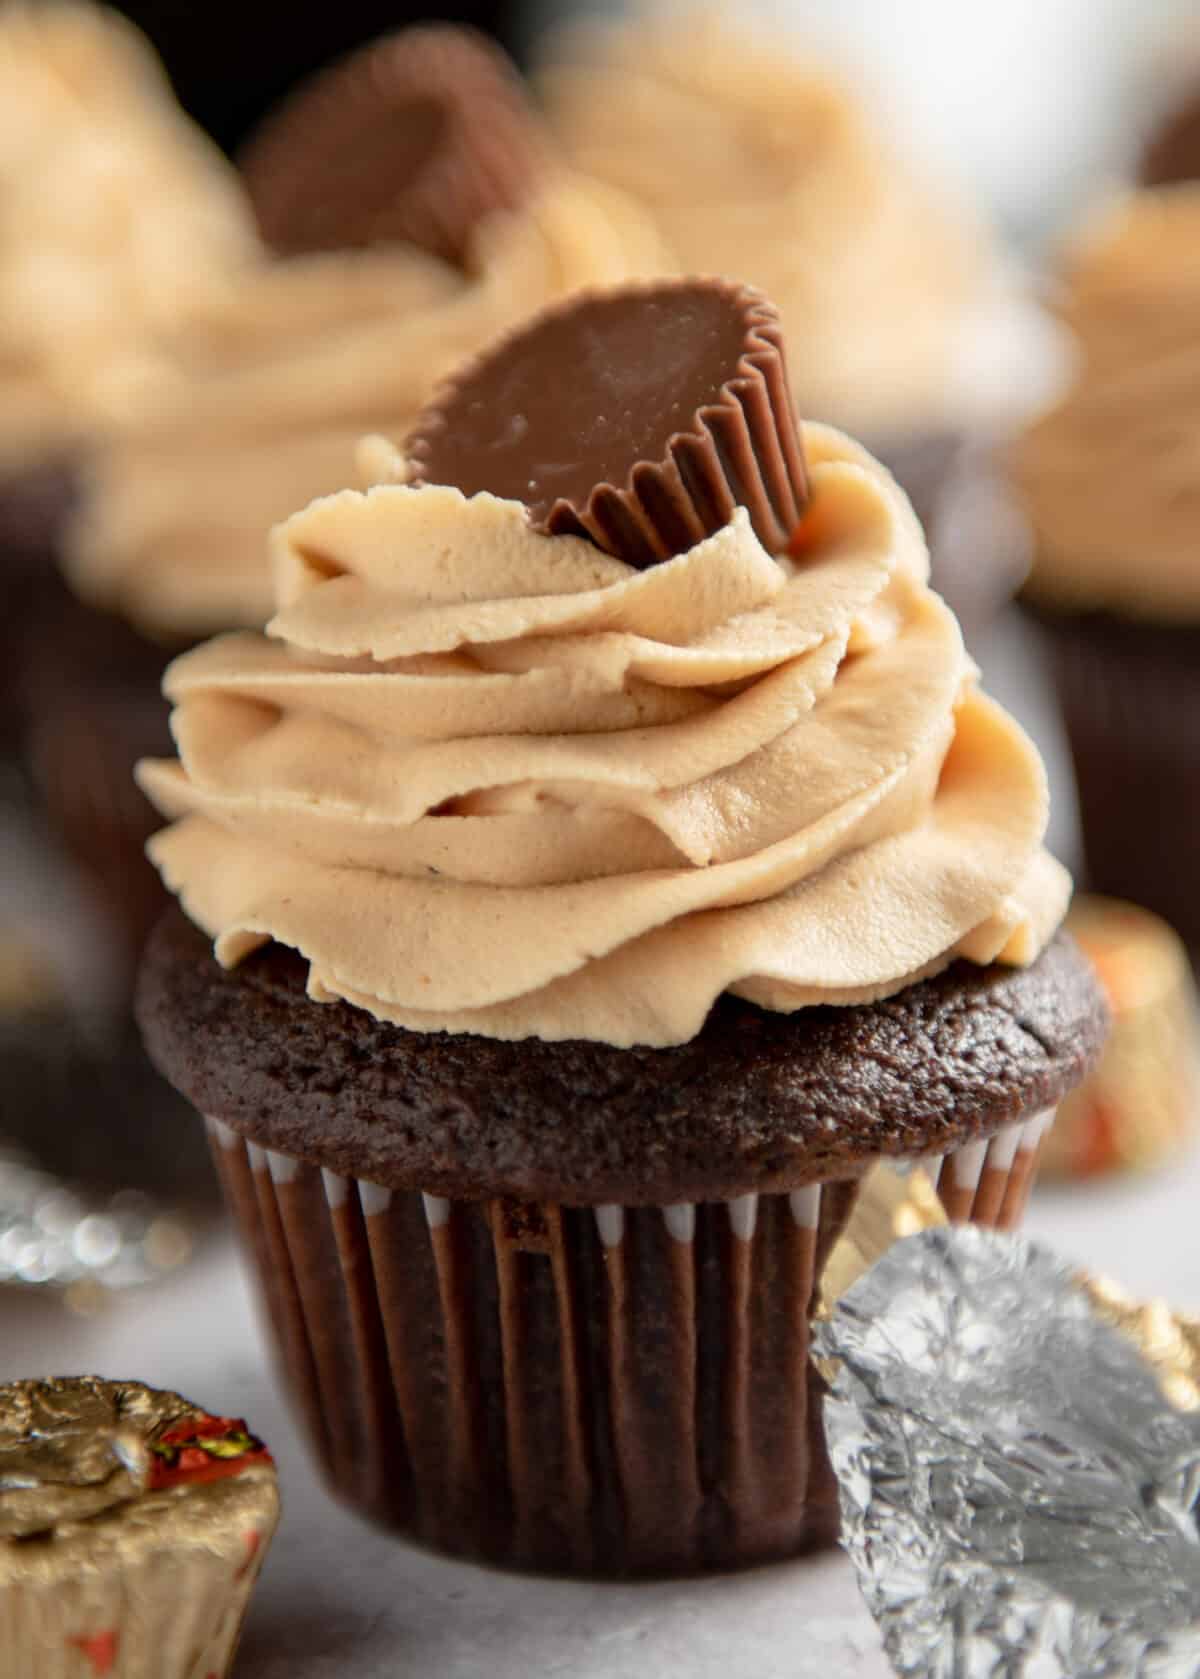 A mini Reese's treat on top of the frosting on a chocolate cupcake.